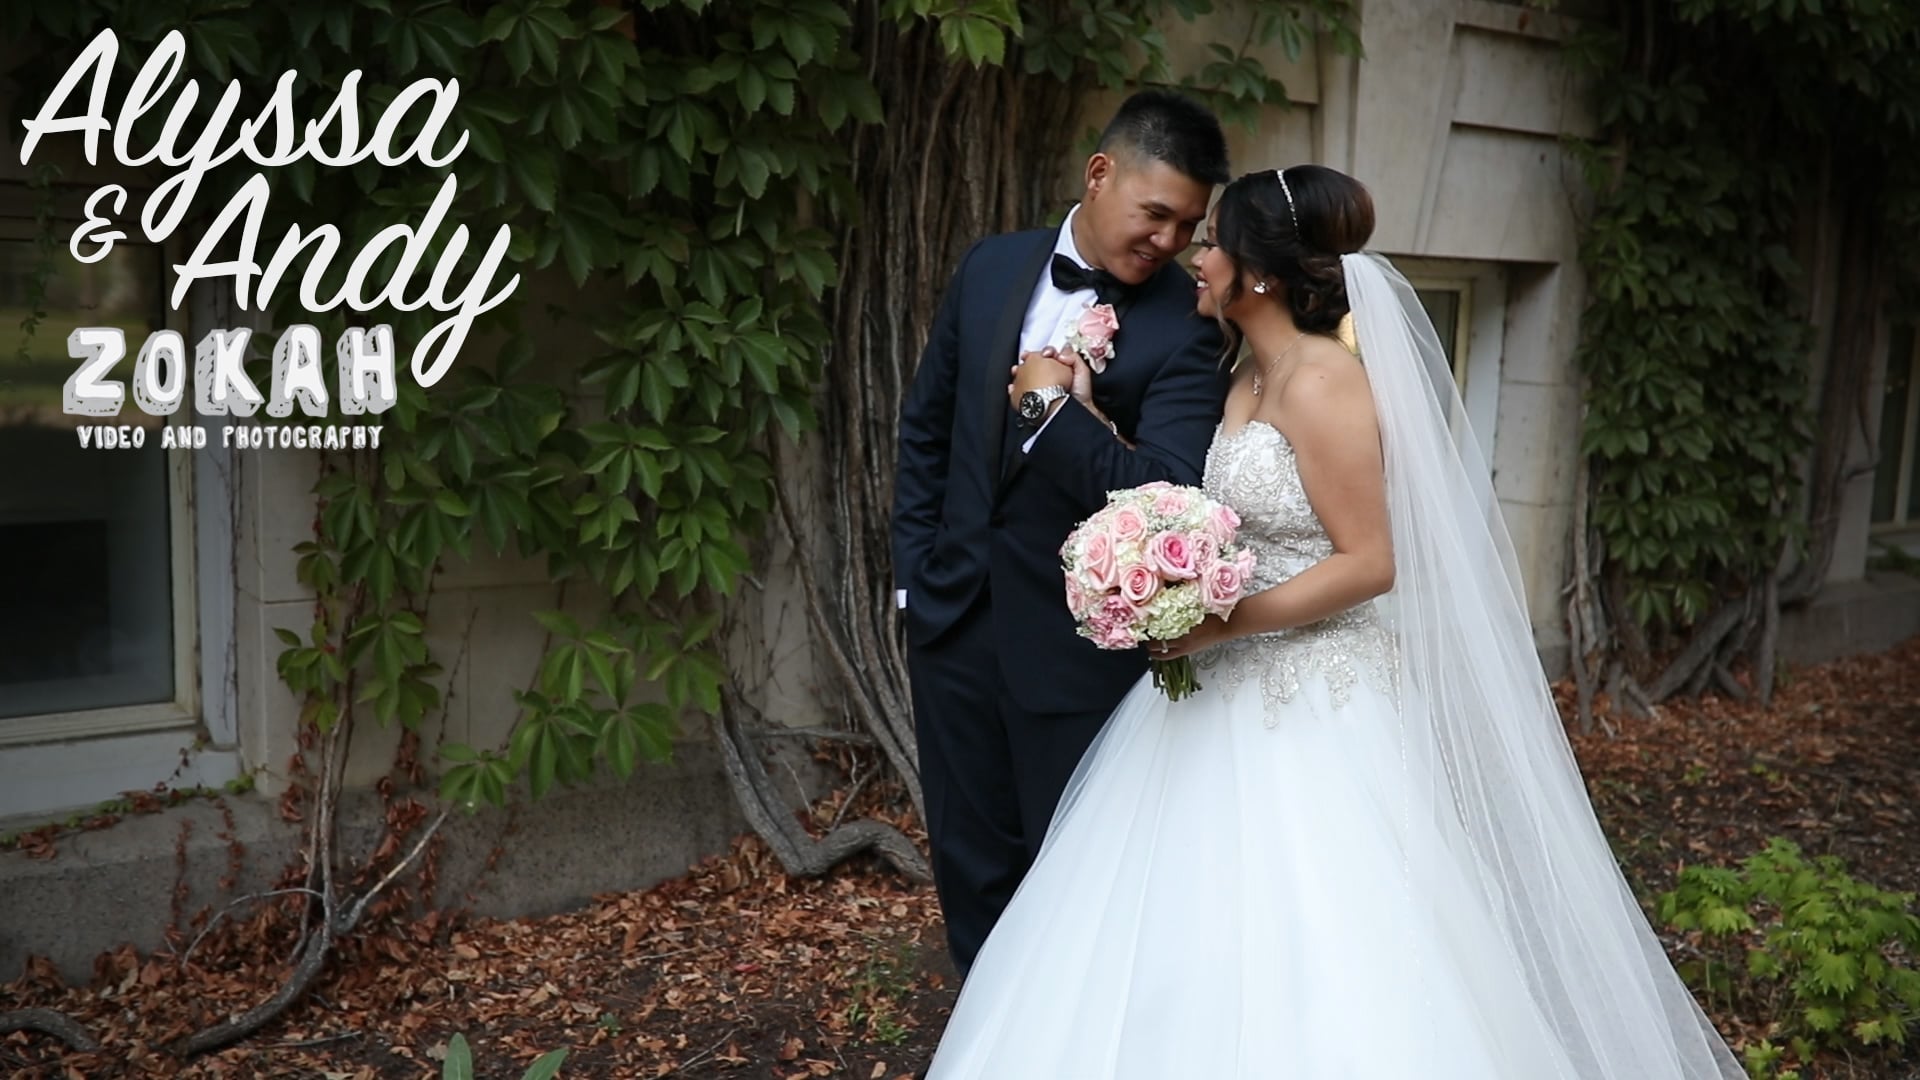 Katie and Steven - Highlight Film - Zokah Photography and Video